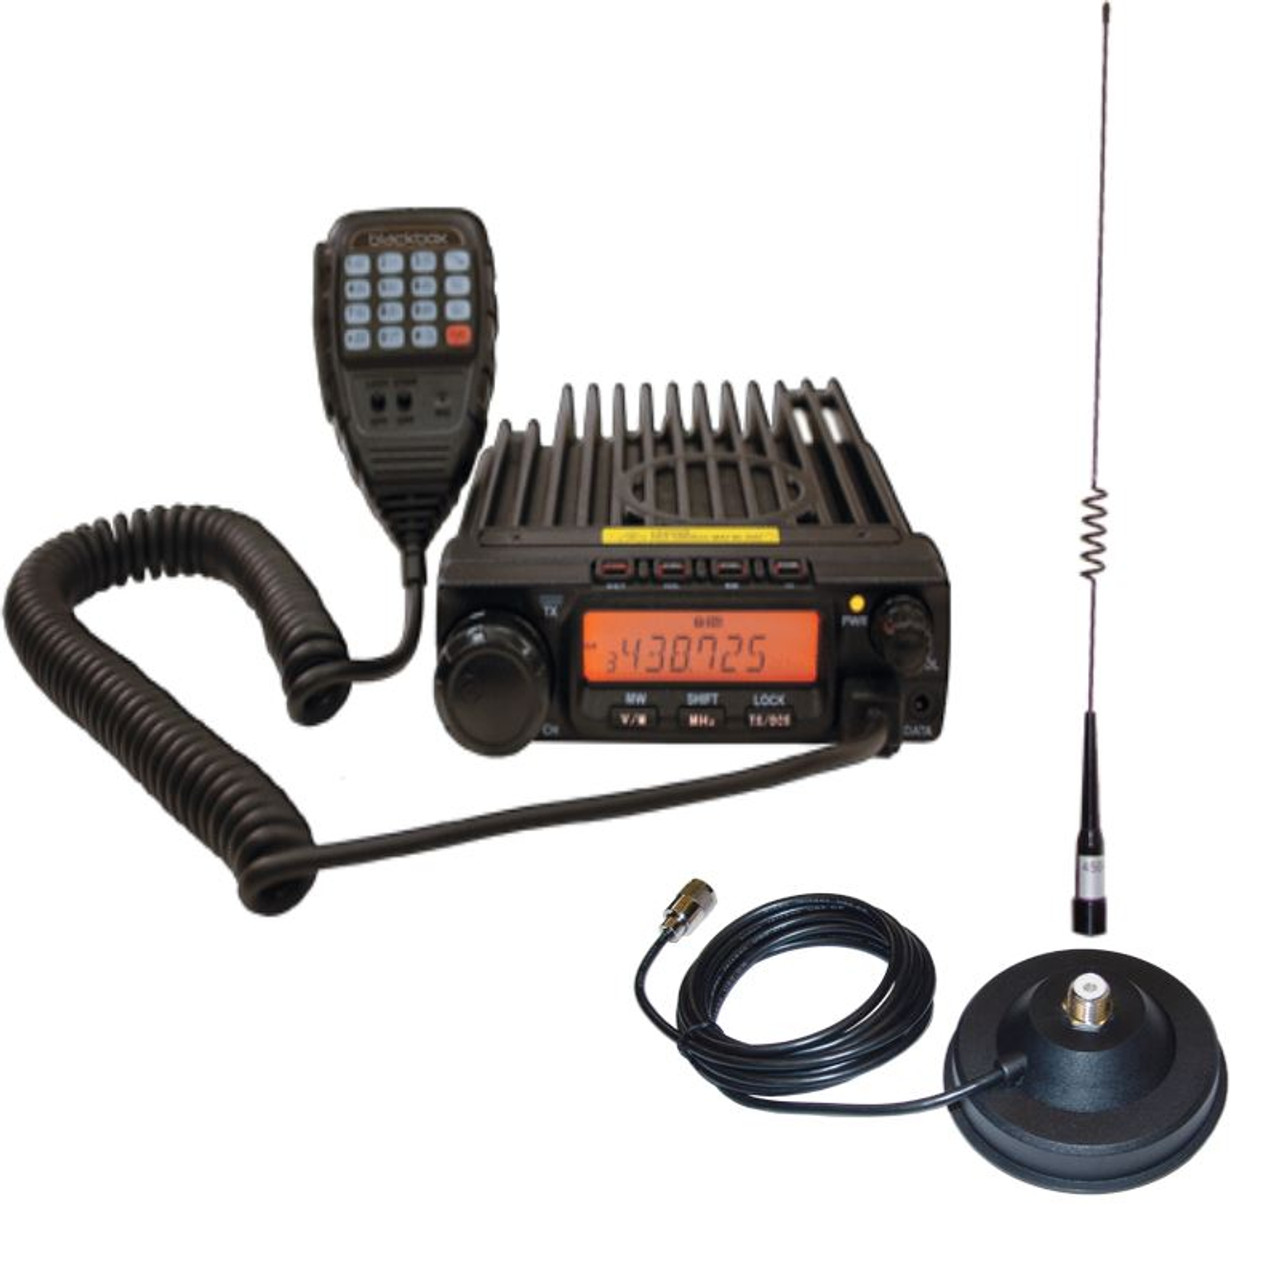 Blackbox Mobile VHF Two Way is 55 Watt, has 200 Channel and is compatible  with Motorola and Kenwood two way radios. Public Safety radios with DTMF  Palm Mic Alpha numeric programmable.